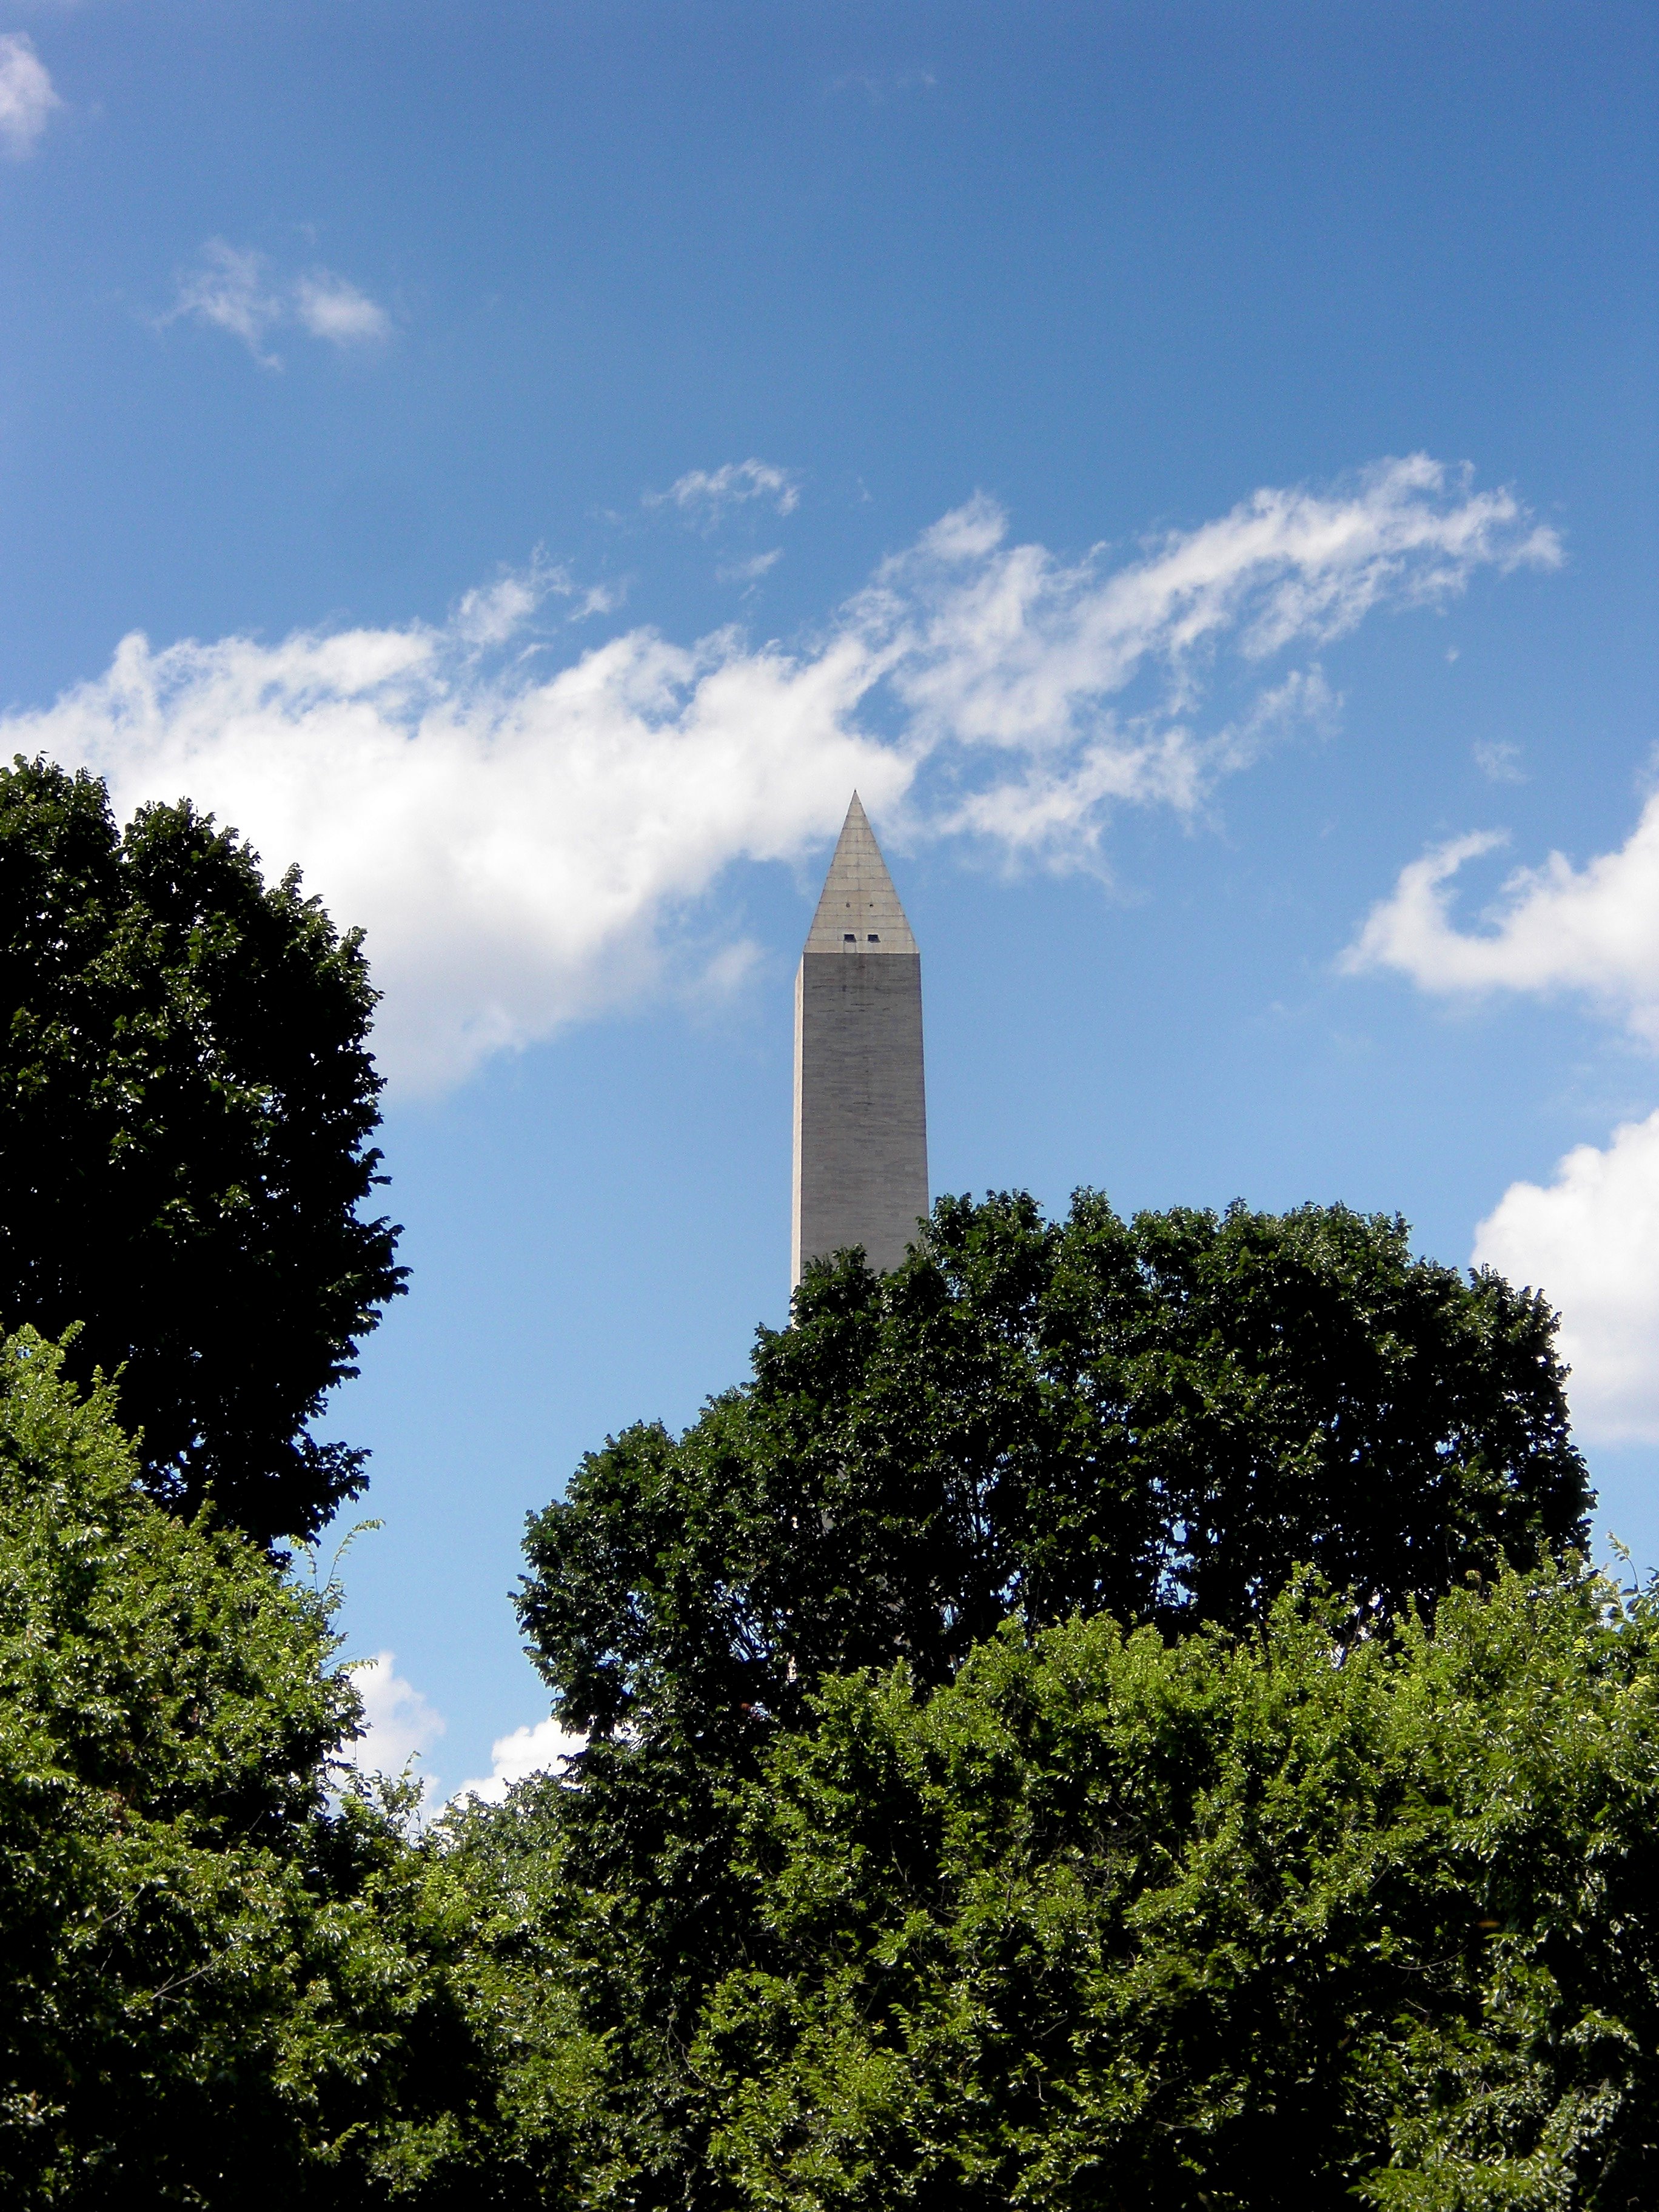 Washing Monument Peak-a-boo, Blue, Clouds, Green, Historic, HQ Photo